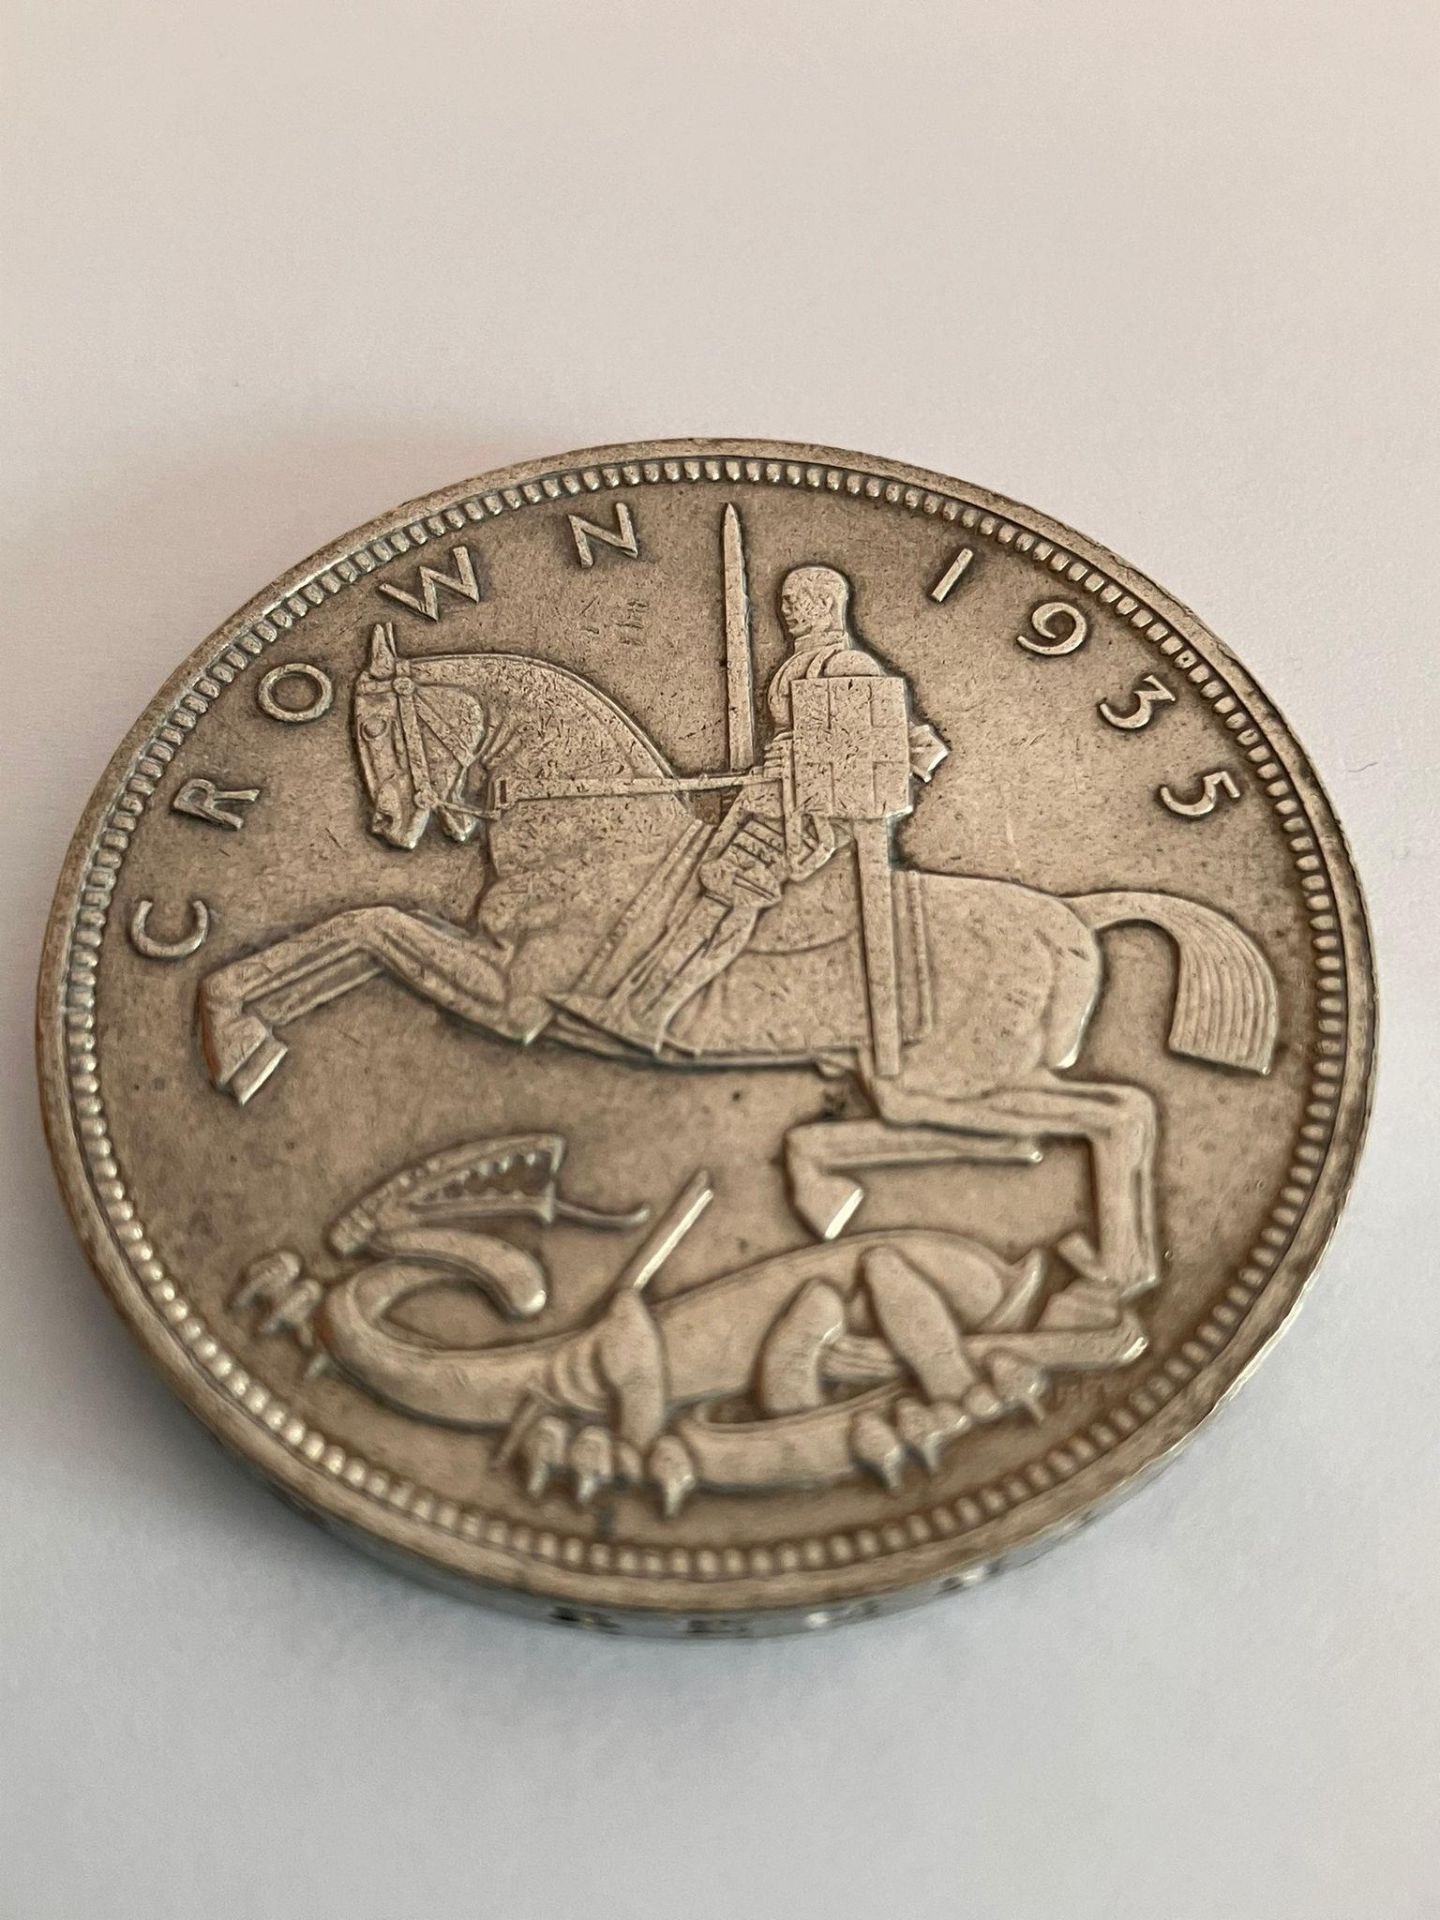 1935 SILVER ROCKING HORSE CROWN. Extra fine condition. Having raised bold definition to both